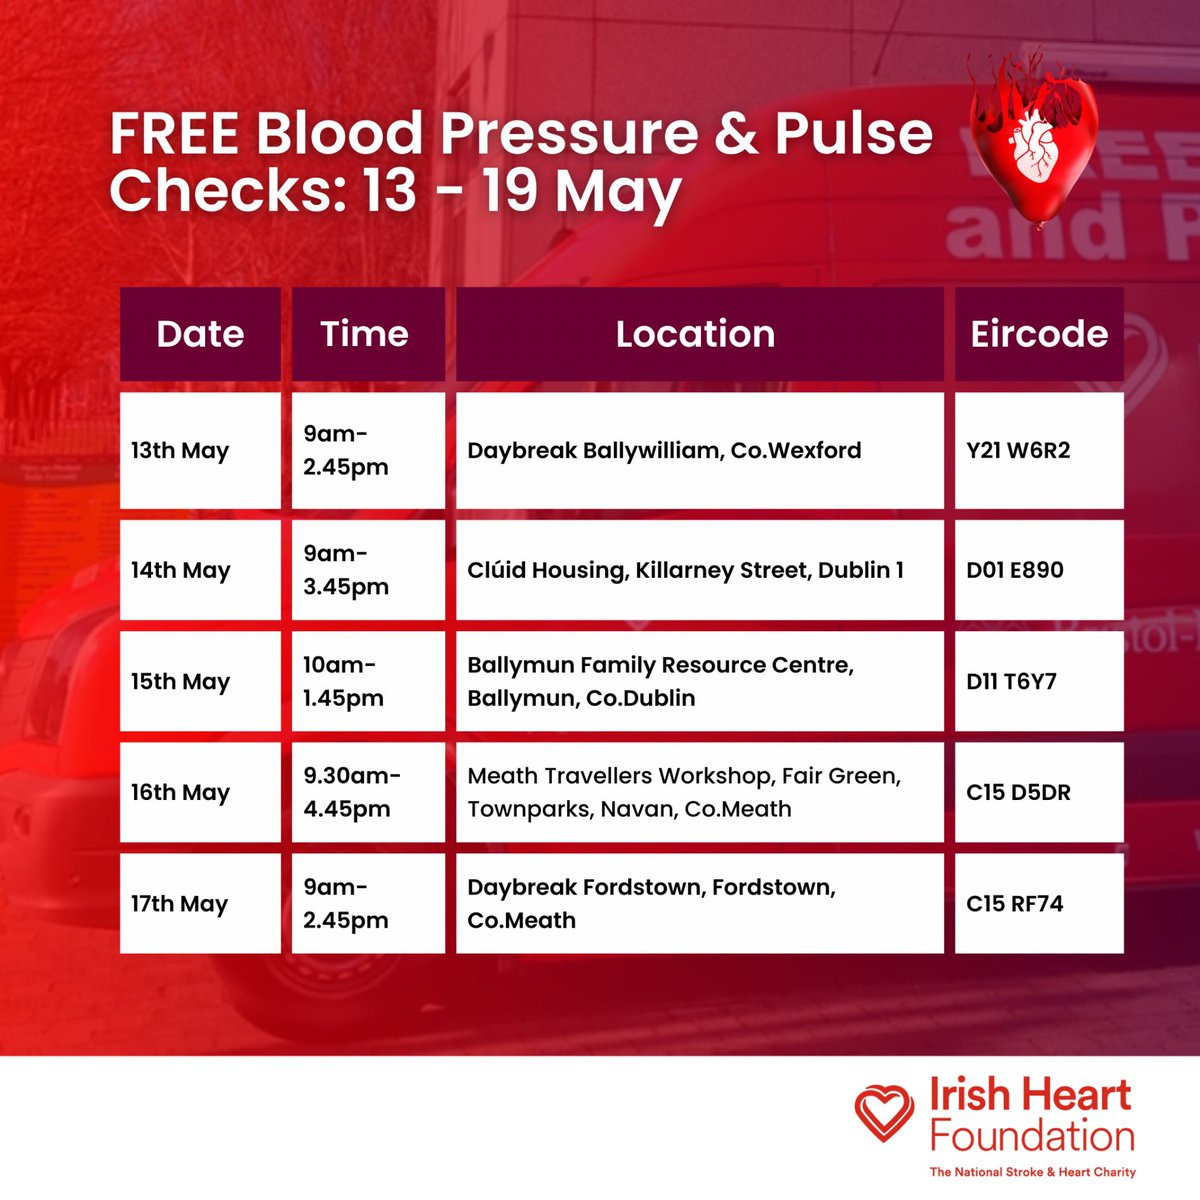 Visit our Mobile Health Unit and get a free blood pressure and pulse check. #GetChecked #BeforeDamageIsDone